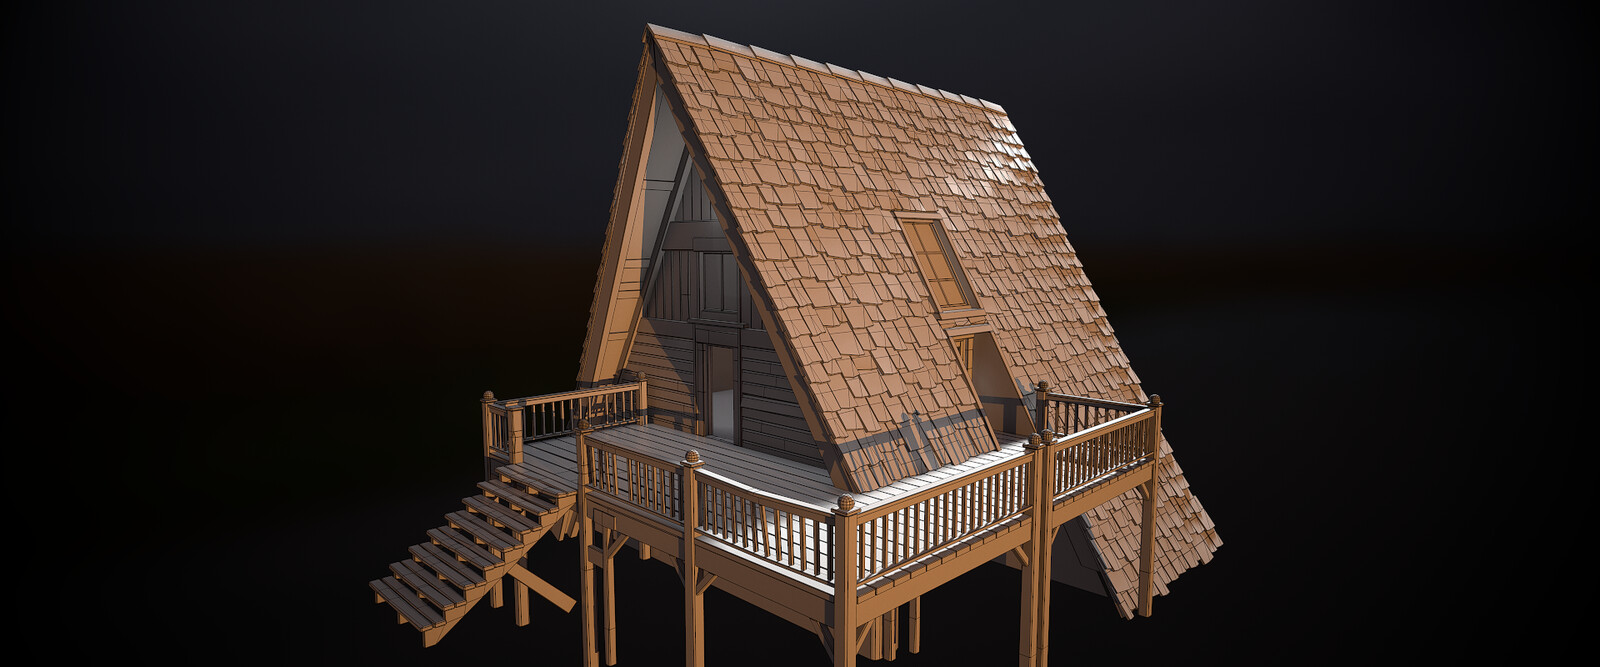 Cabin Wireframe